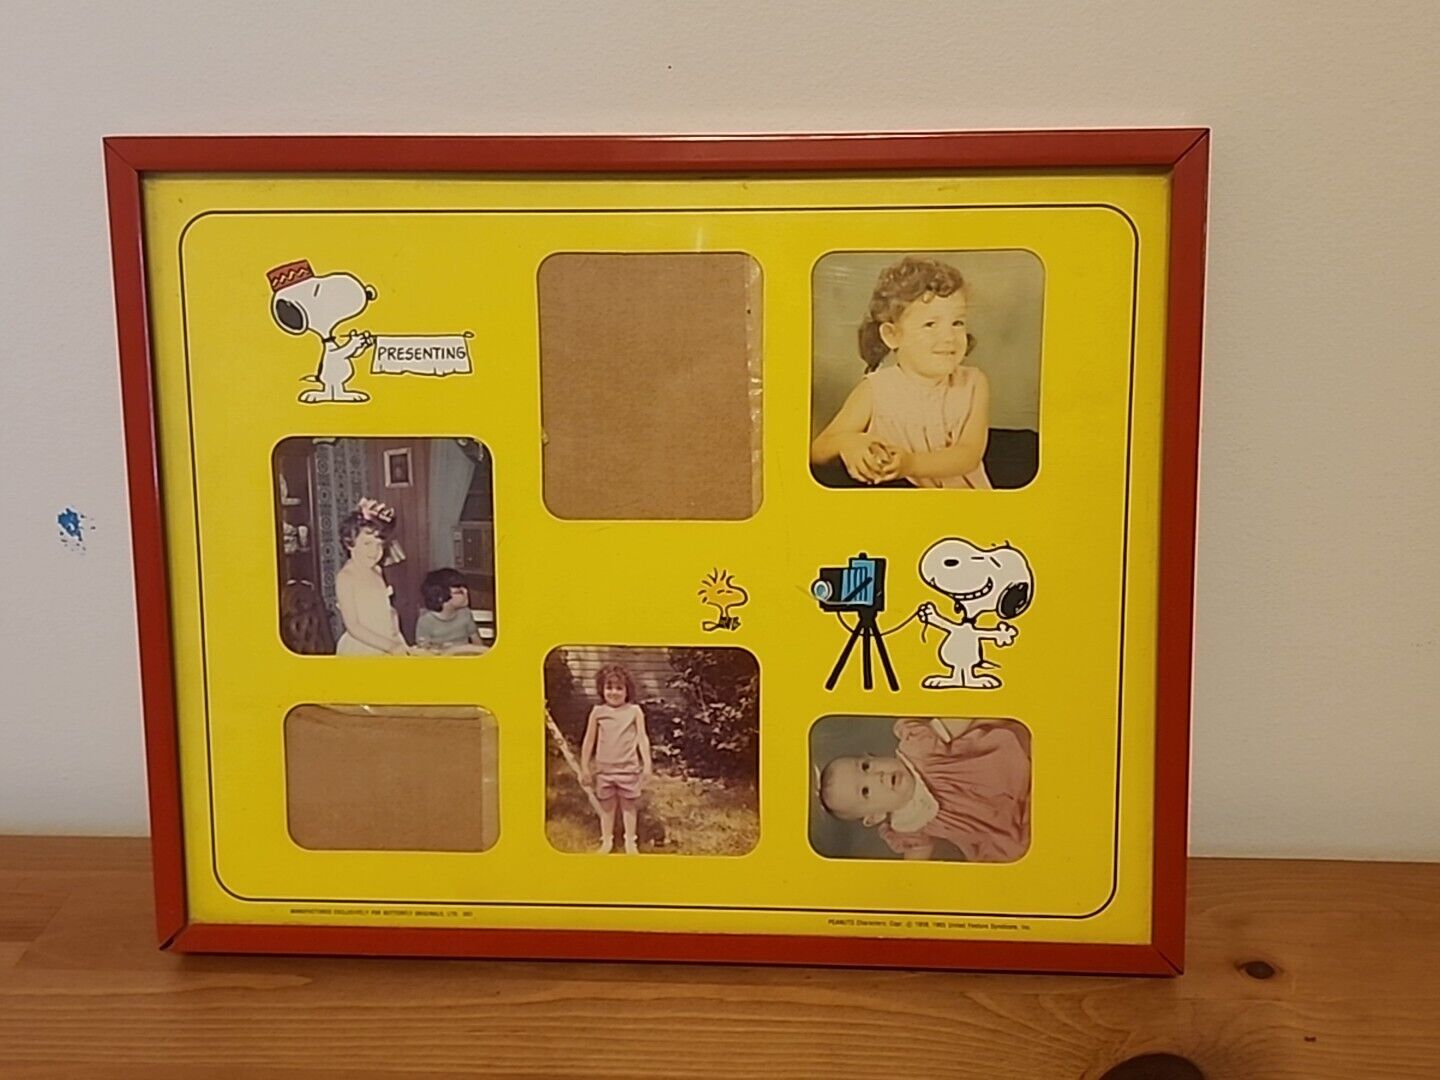 Vtg Snoopy Montage Picture Frame Collage Woodstock Peanuts 1965 Unused 11 x 14